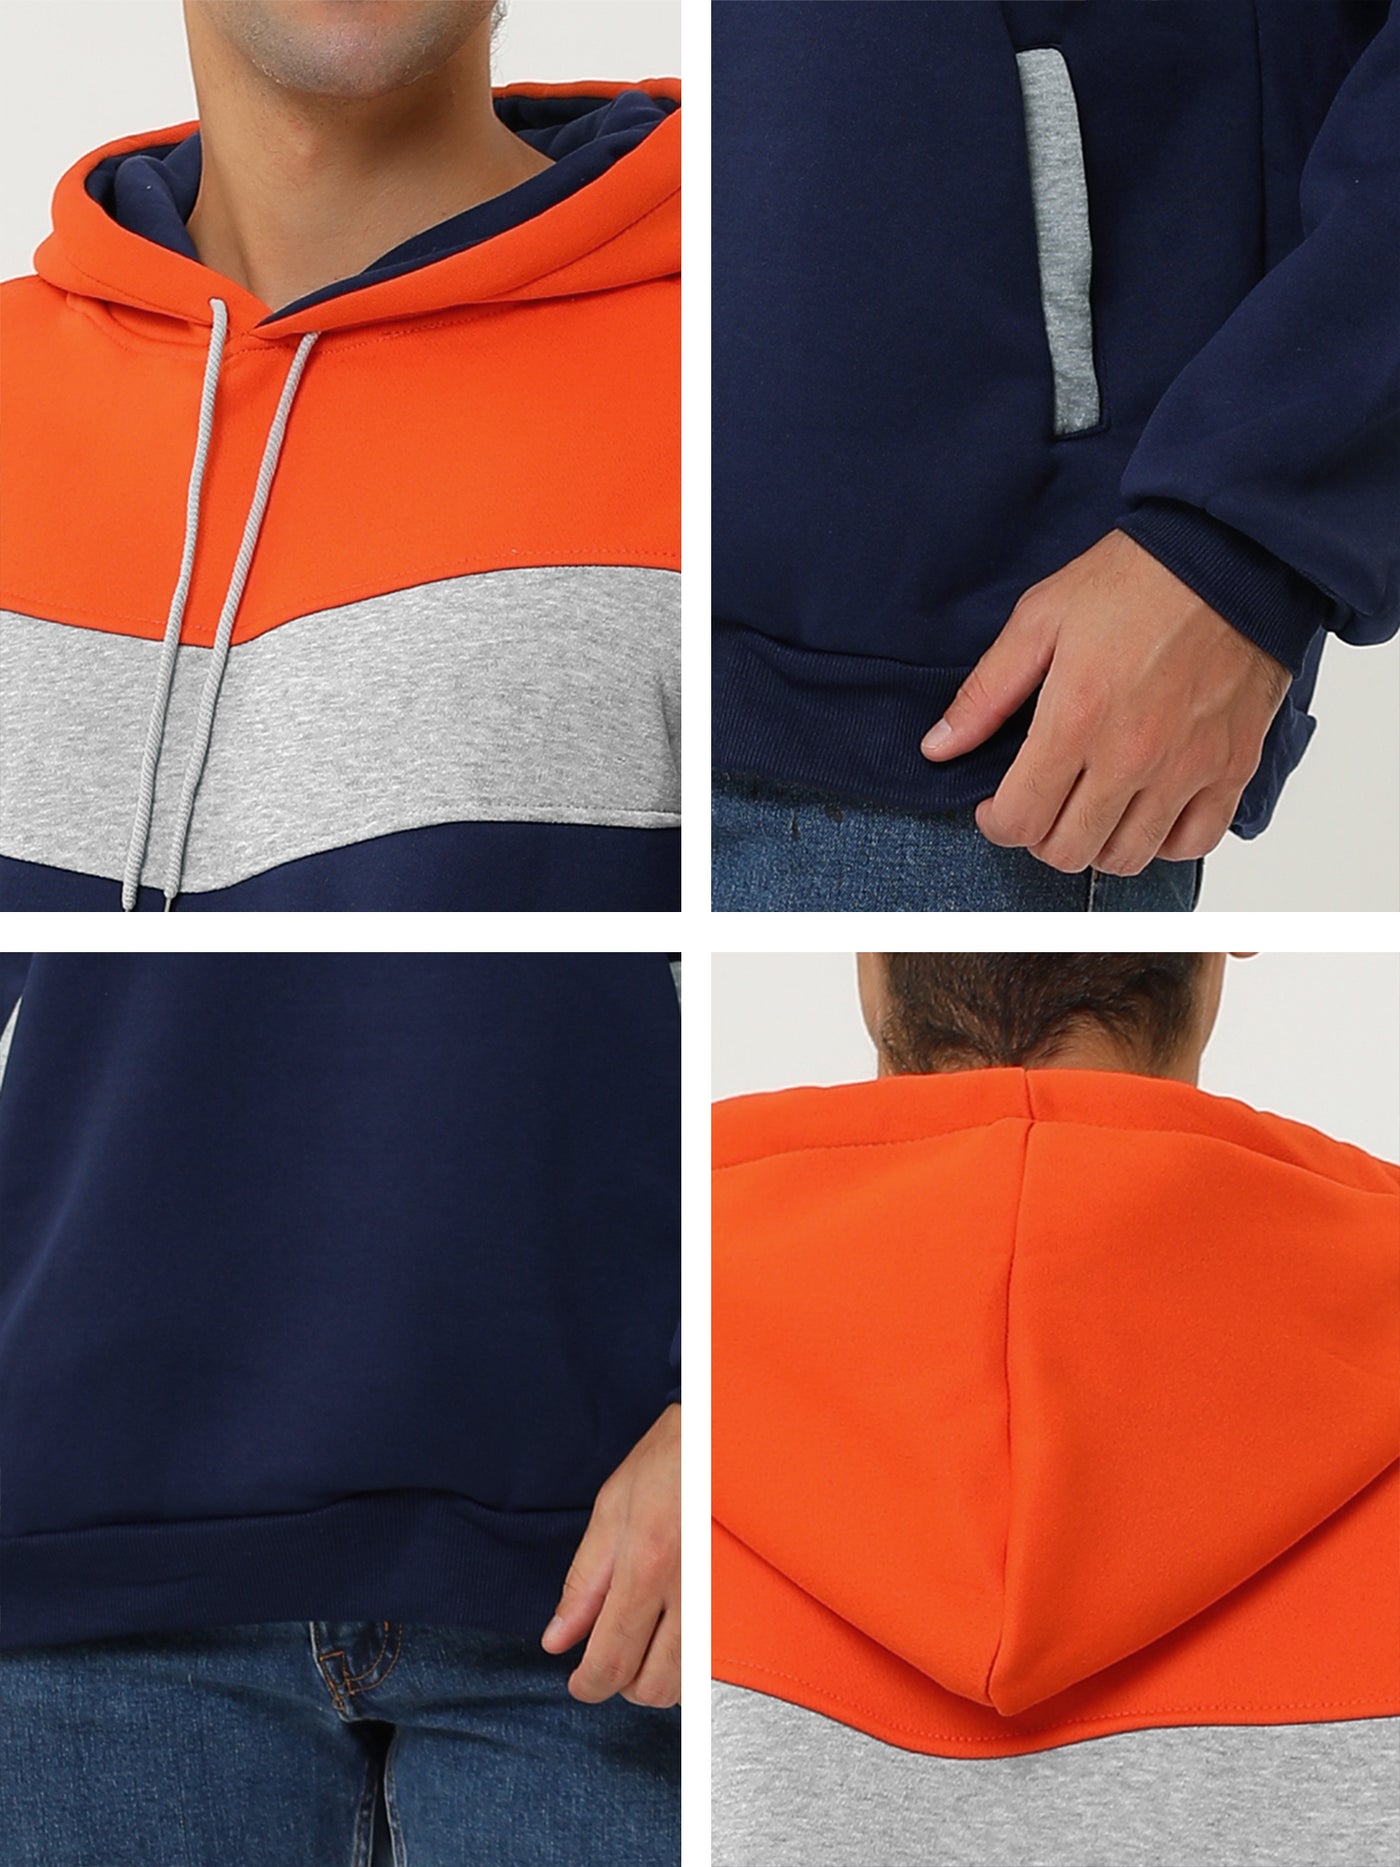 Bublédon Casual Color Block Plush Lined Pullover Hoodies